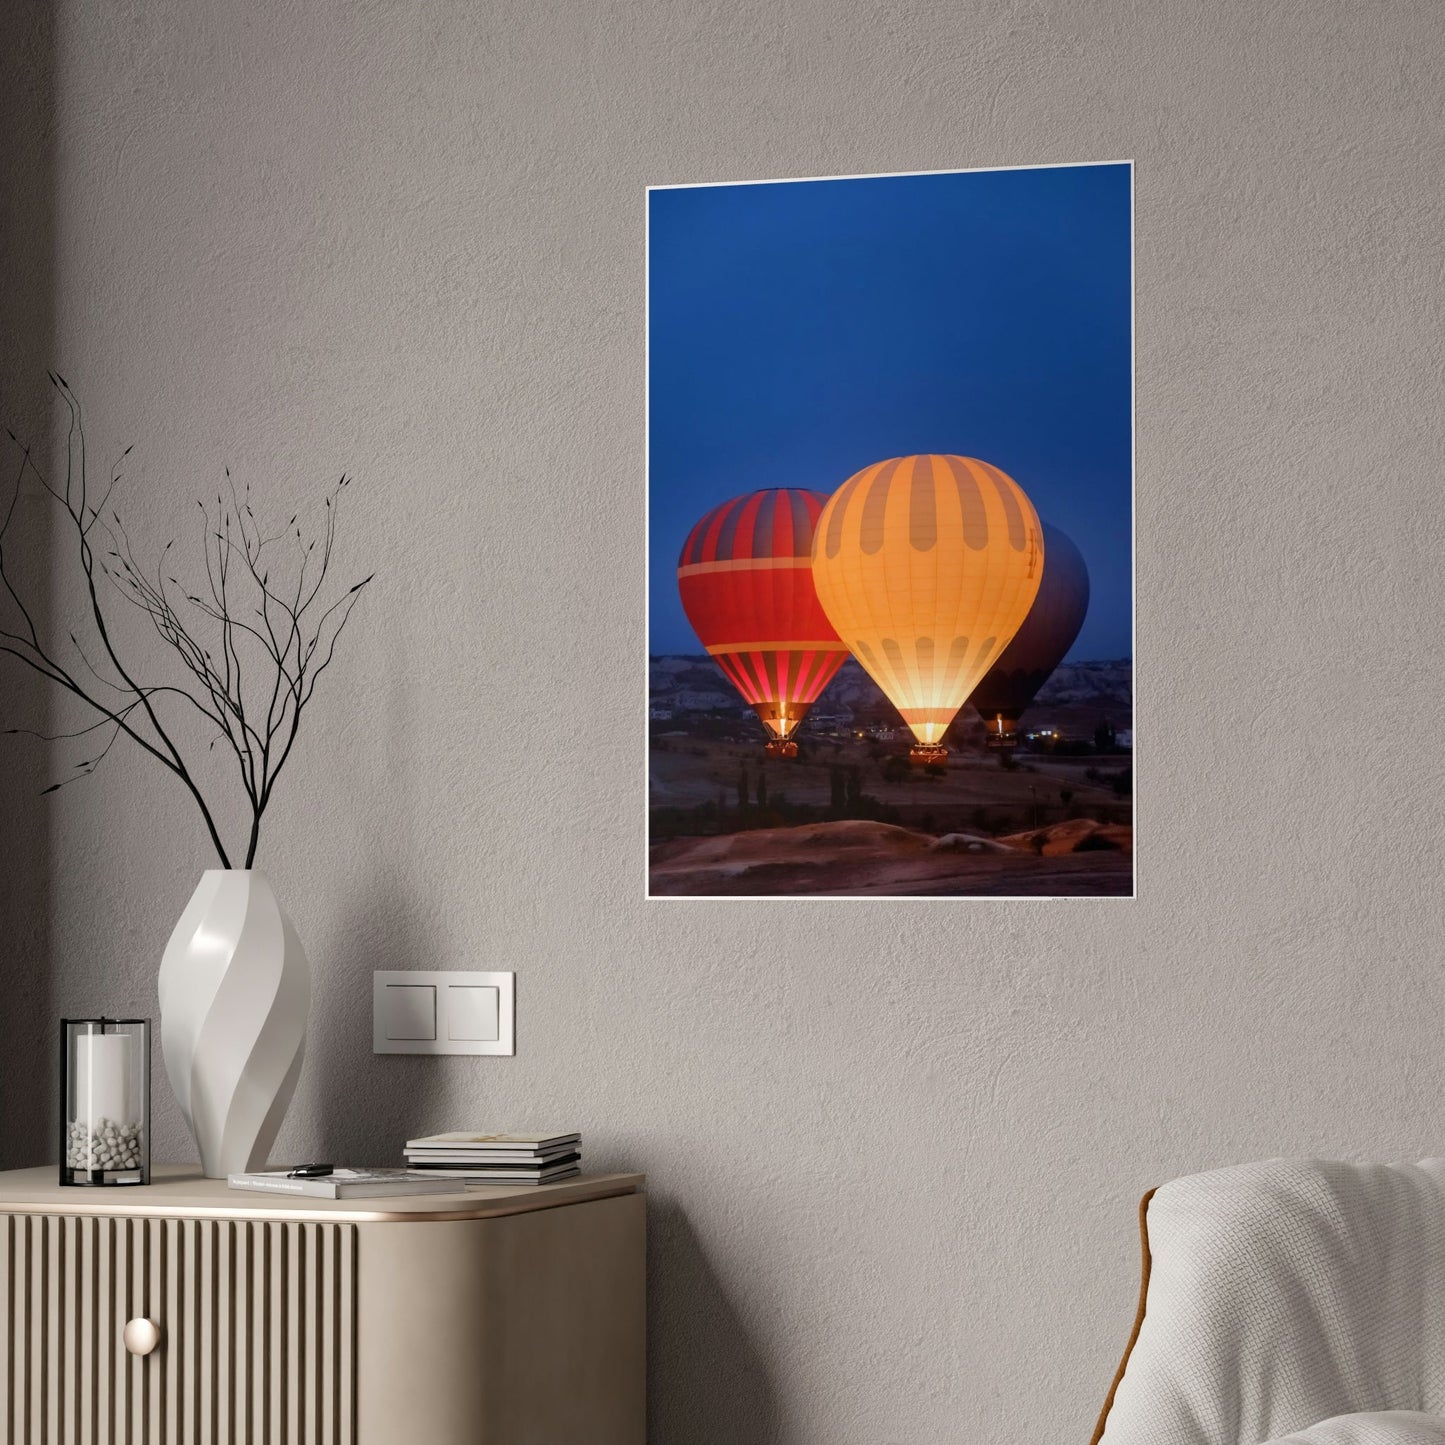 Aerial Adventure: Framed Canvas & Poster of a Hot Air Balloon Over Mountains